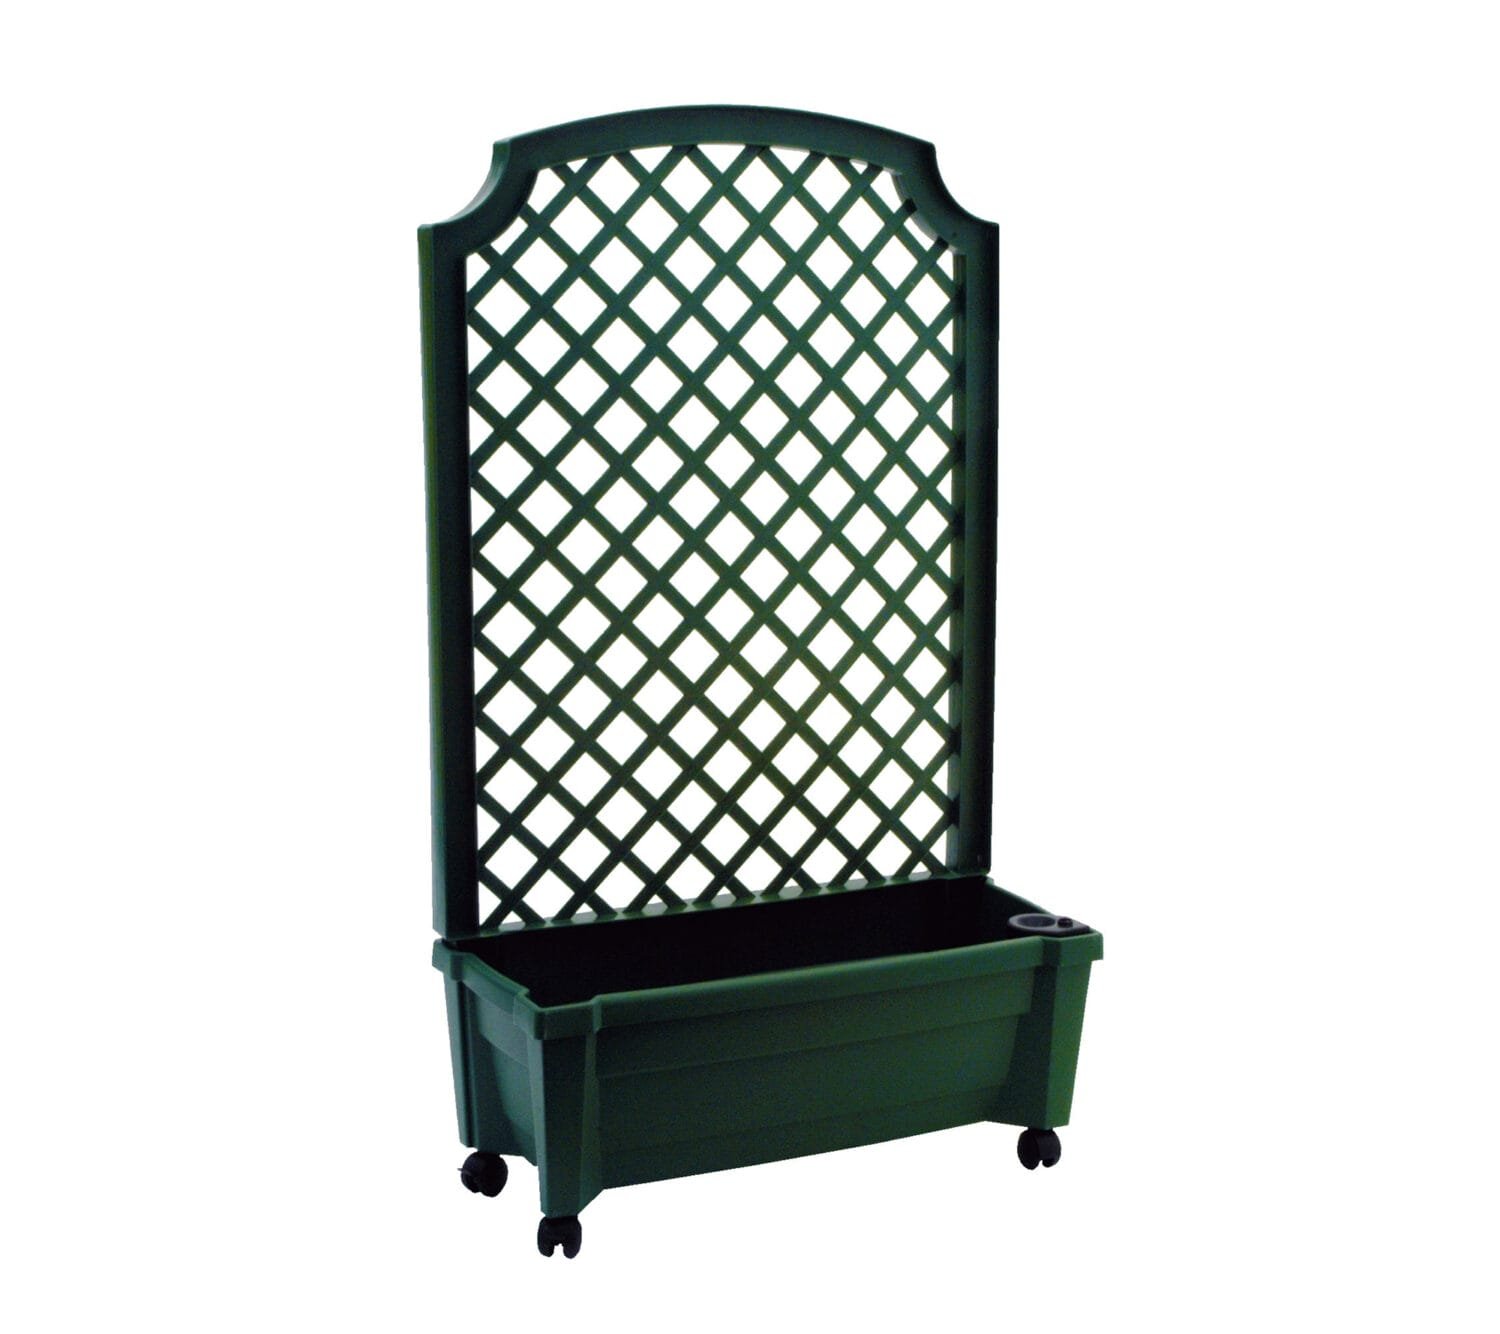 Calypso Planter with Trellis and Water Reservoirer3